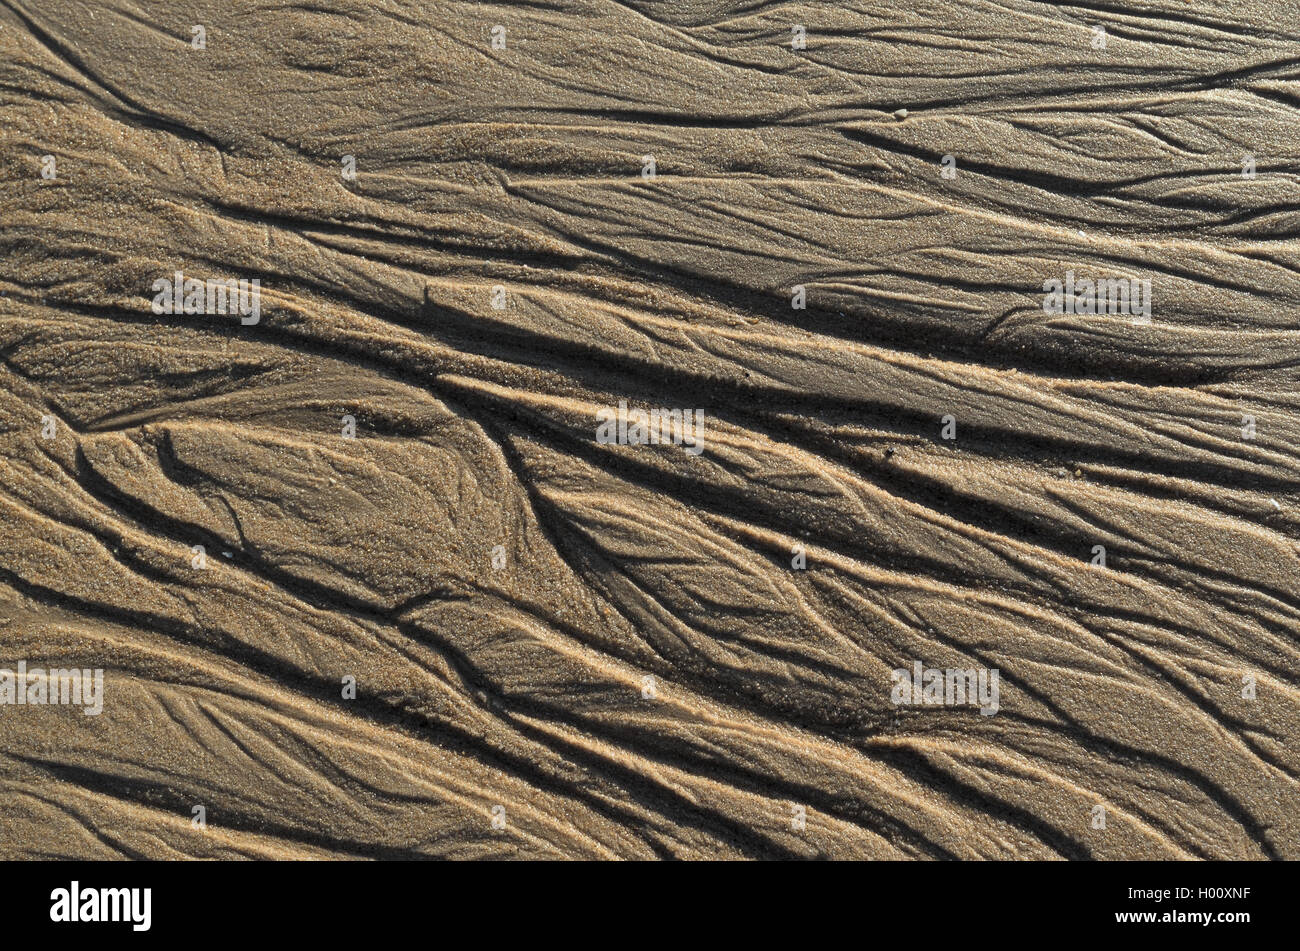 Beach sand surface texture. Natural backgrounds and textures Stock Photo